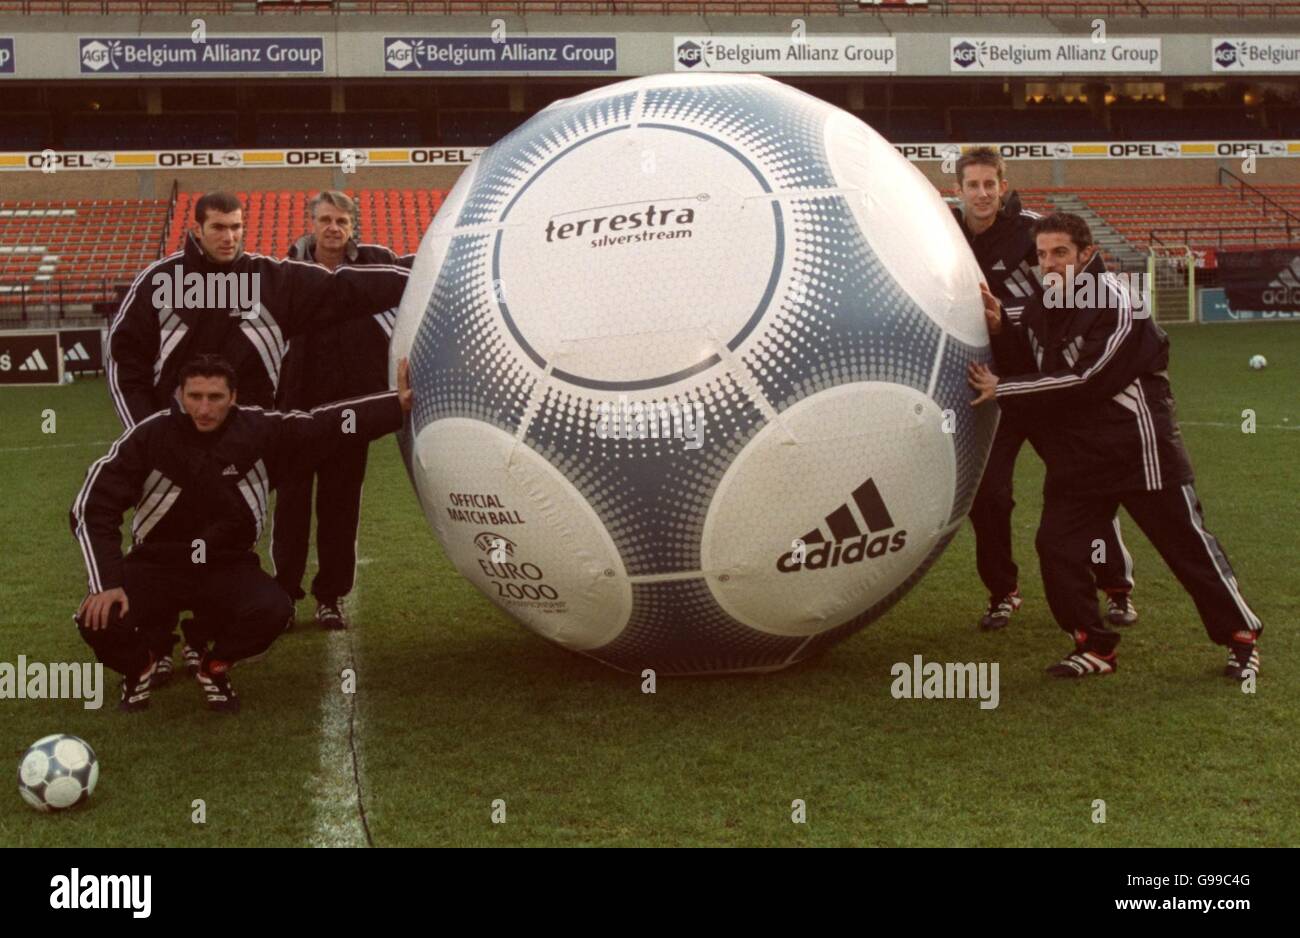 Soccer - Launch of Official Euro 2000 Ball - Adidas Terrestra Silverstream  Stock Photo - Alamy